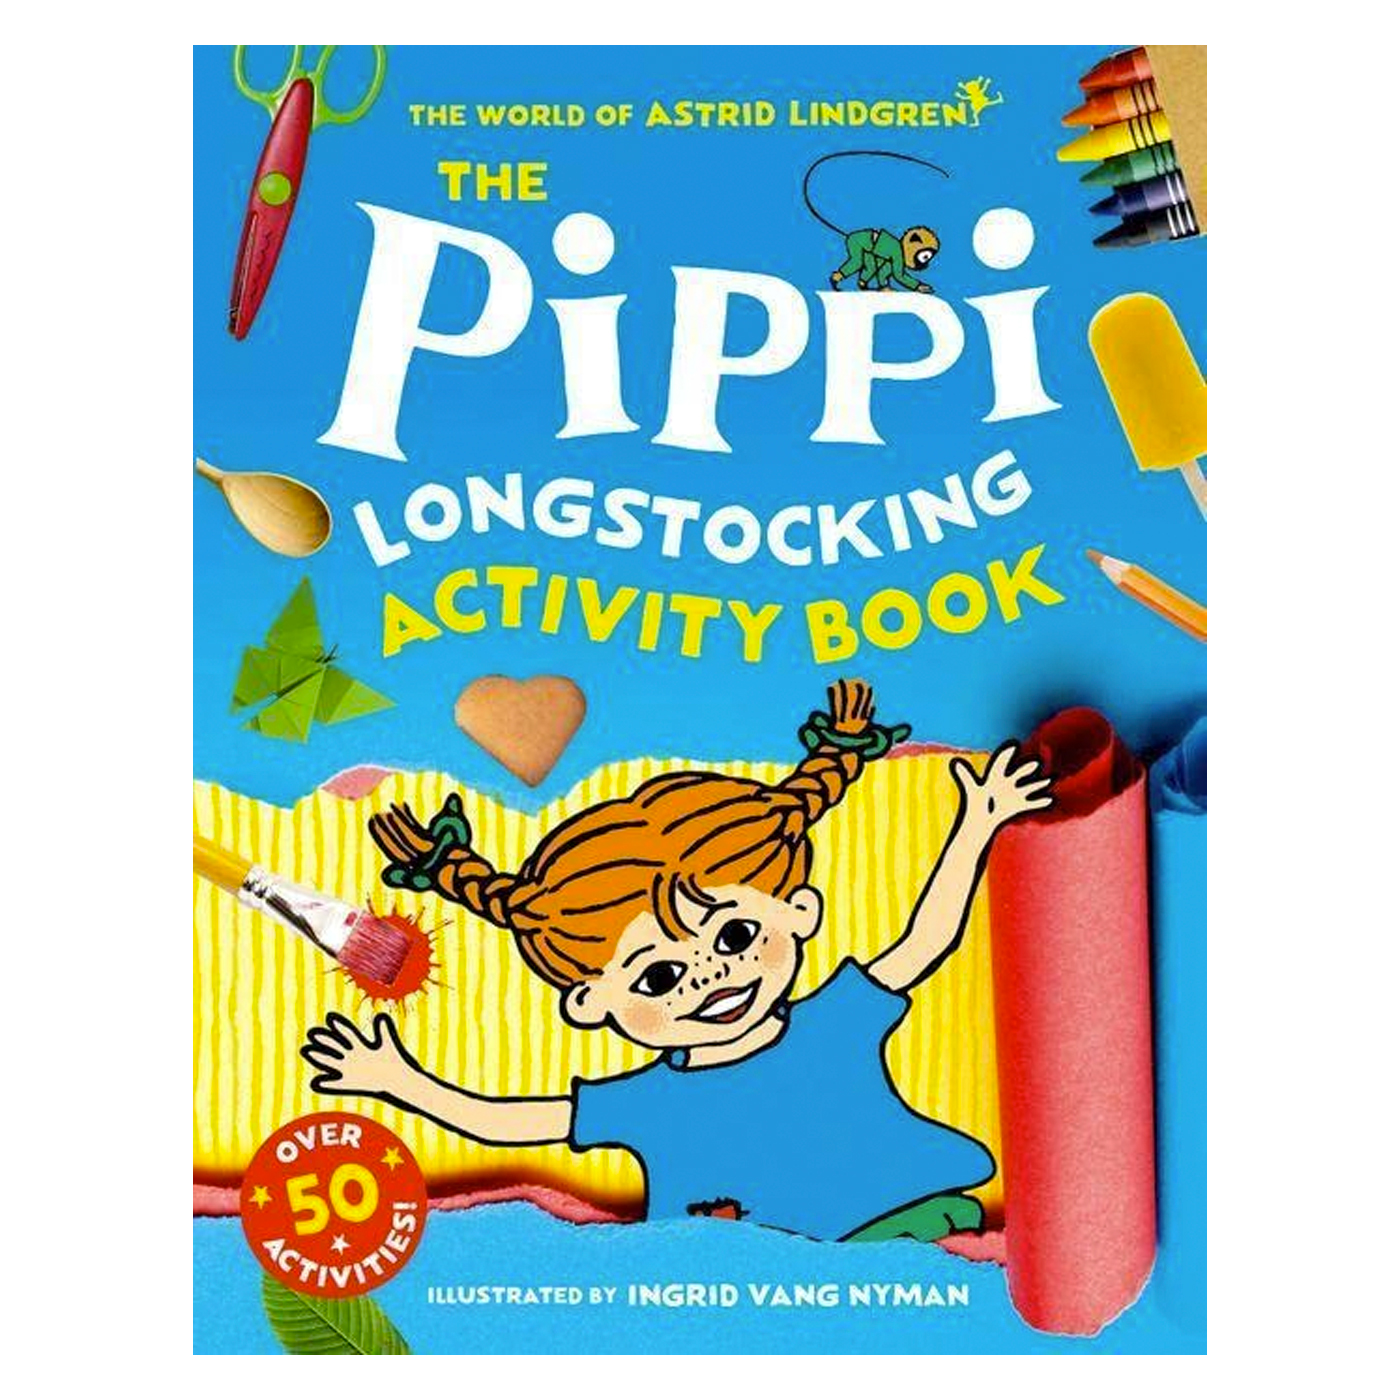 OXFORD CHILDRENS BOOK The Pippi Longstocking Activity Book